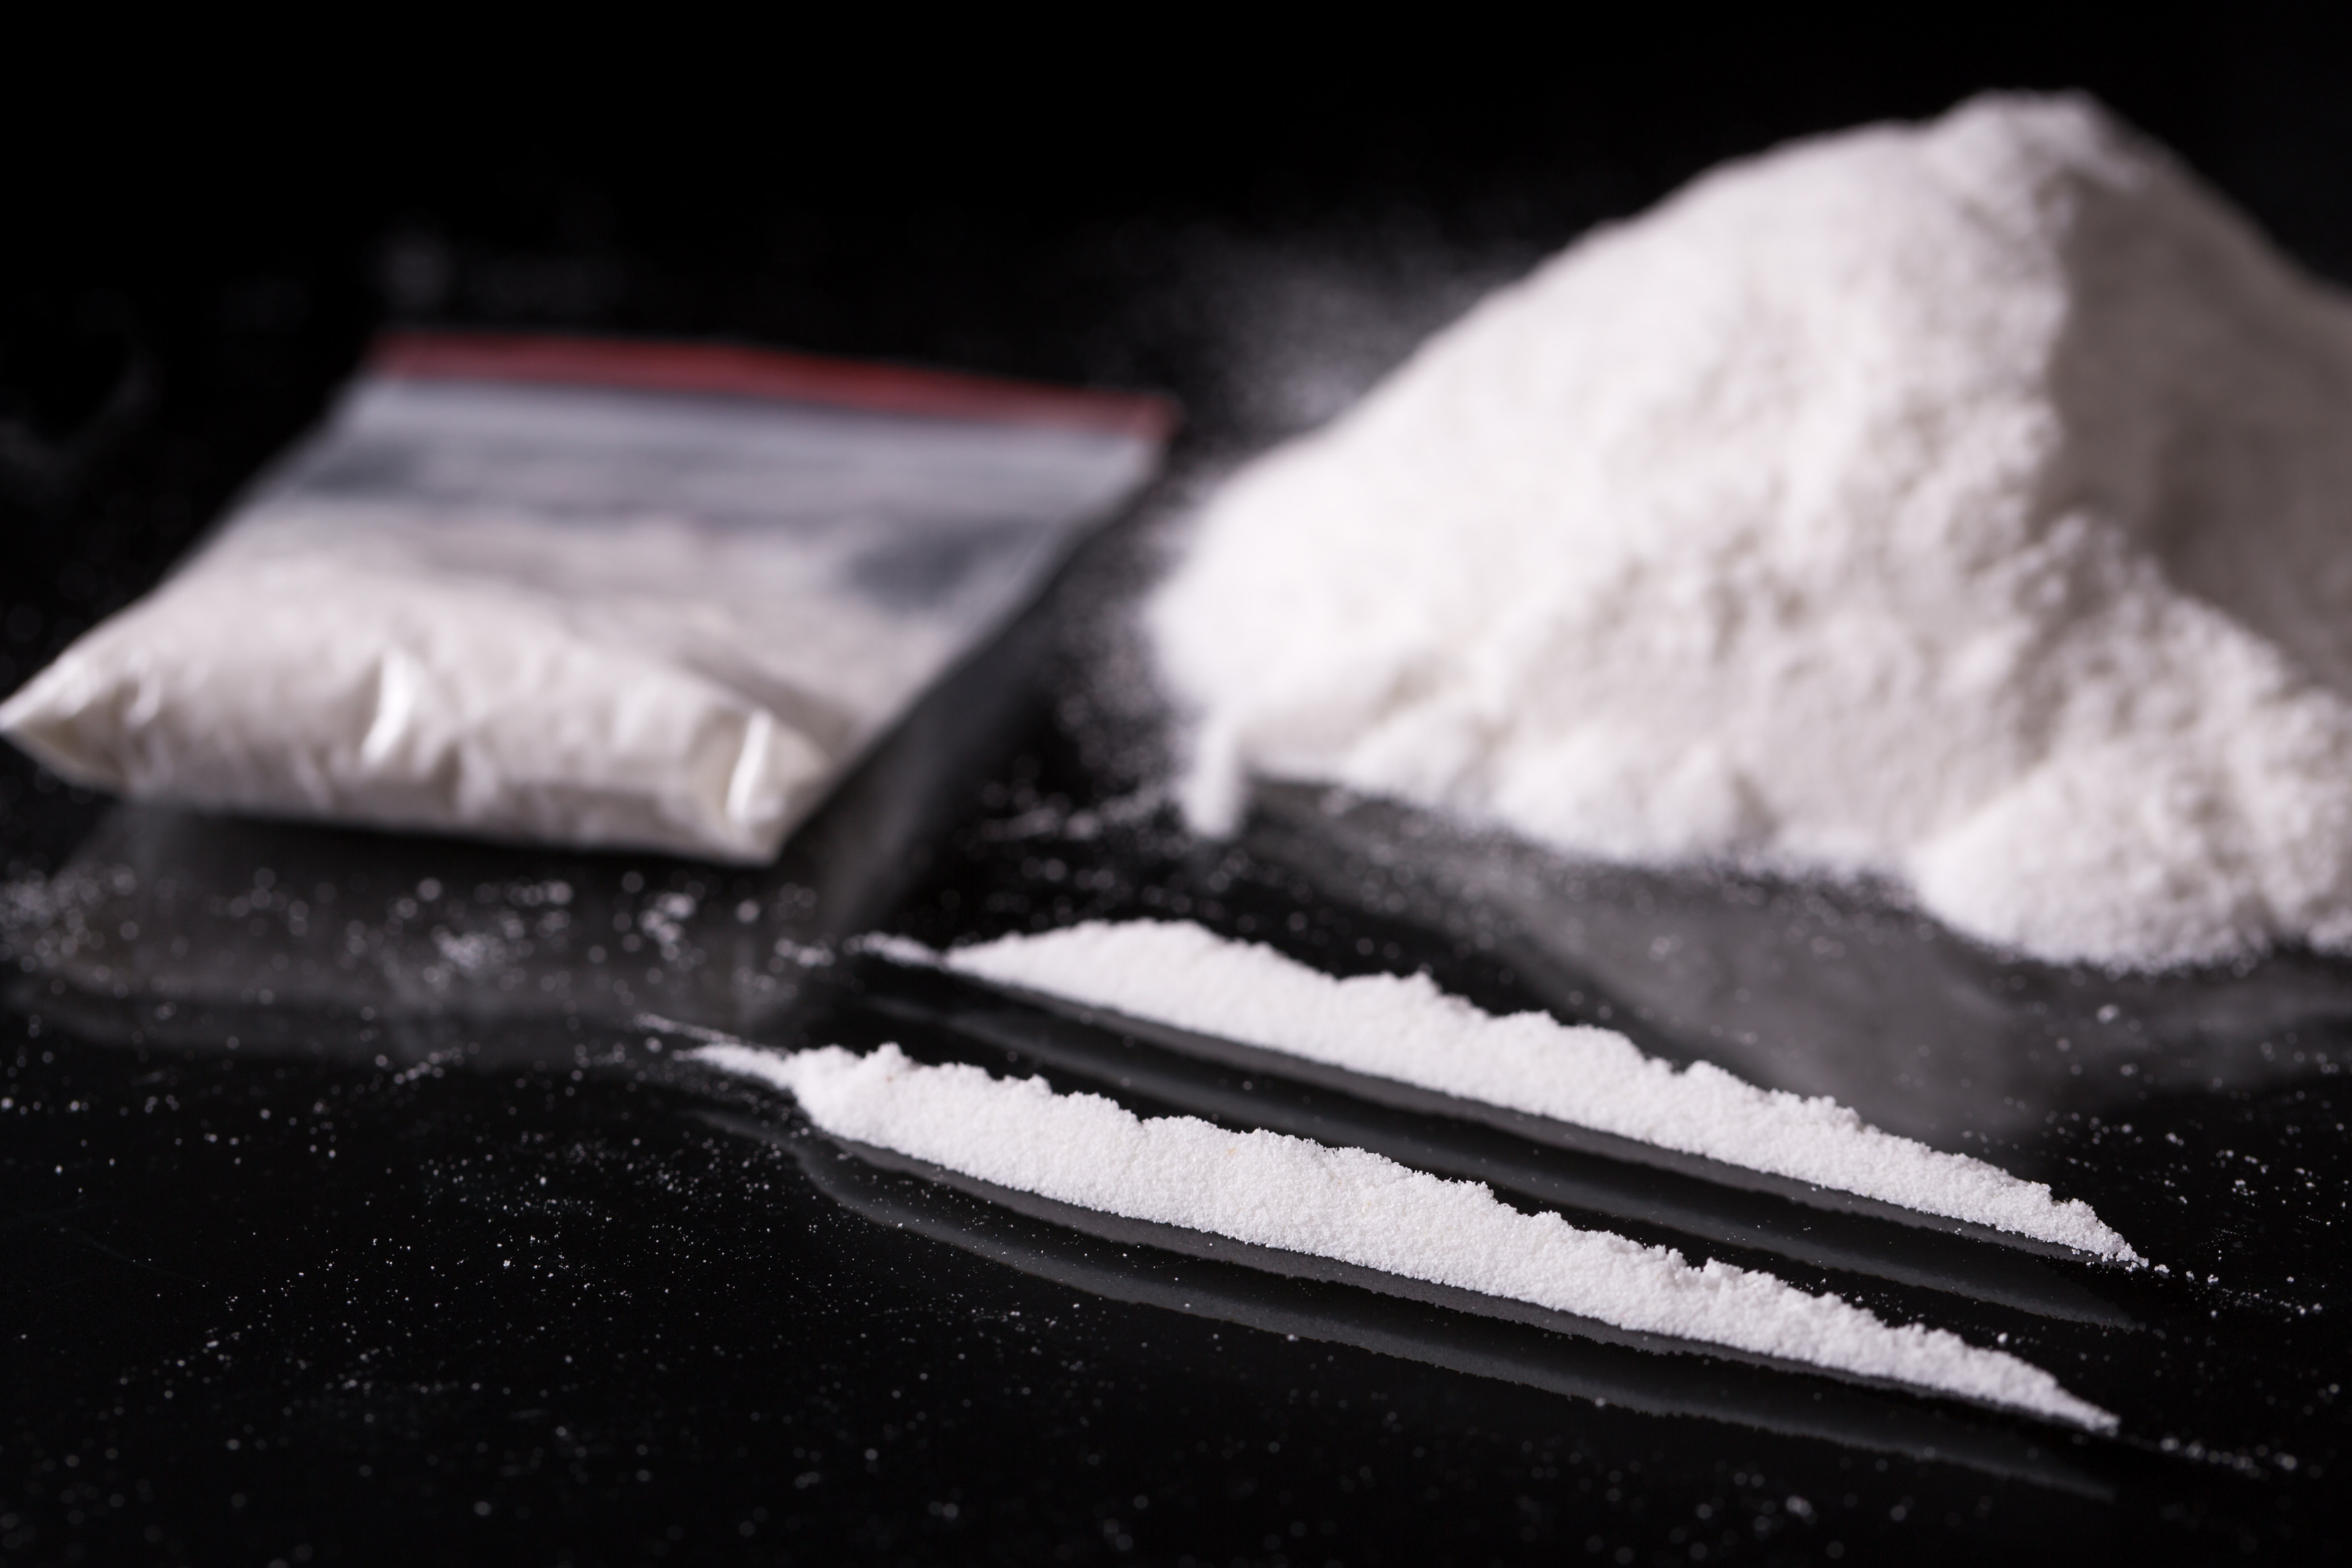 Australia said cocaine shipments are being seized at the country’s borders at record levels. File photo: Shutterstock